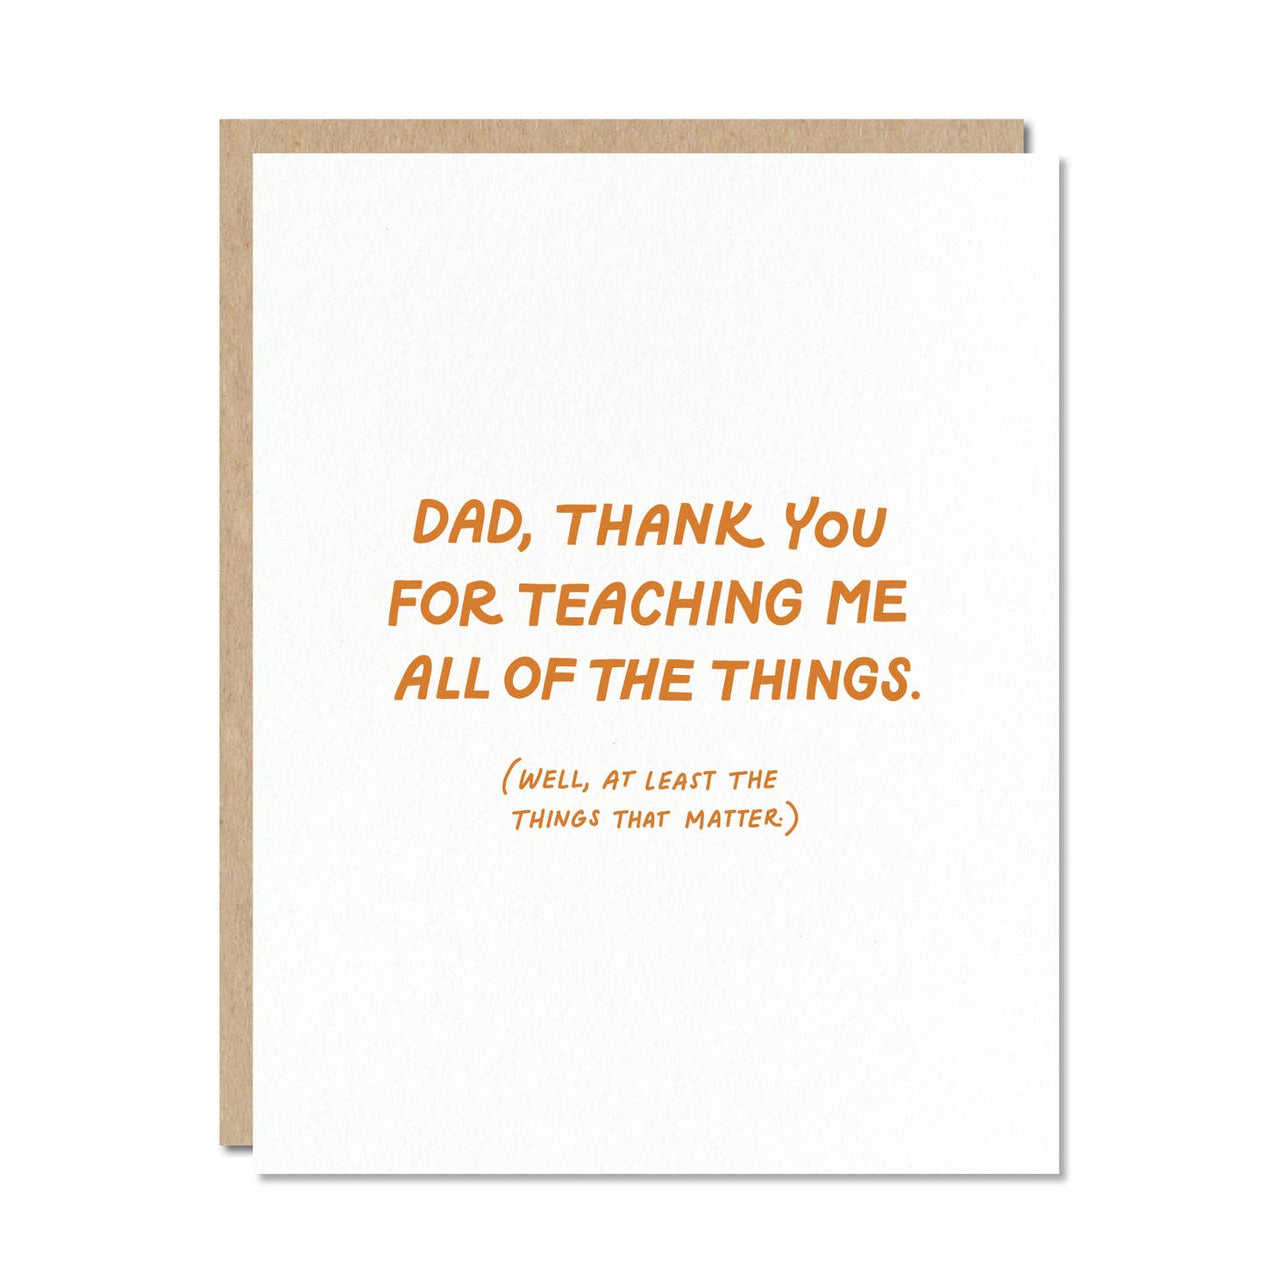 Odd Daughter - Dad, Thank You for Teaching Me Greeting Card